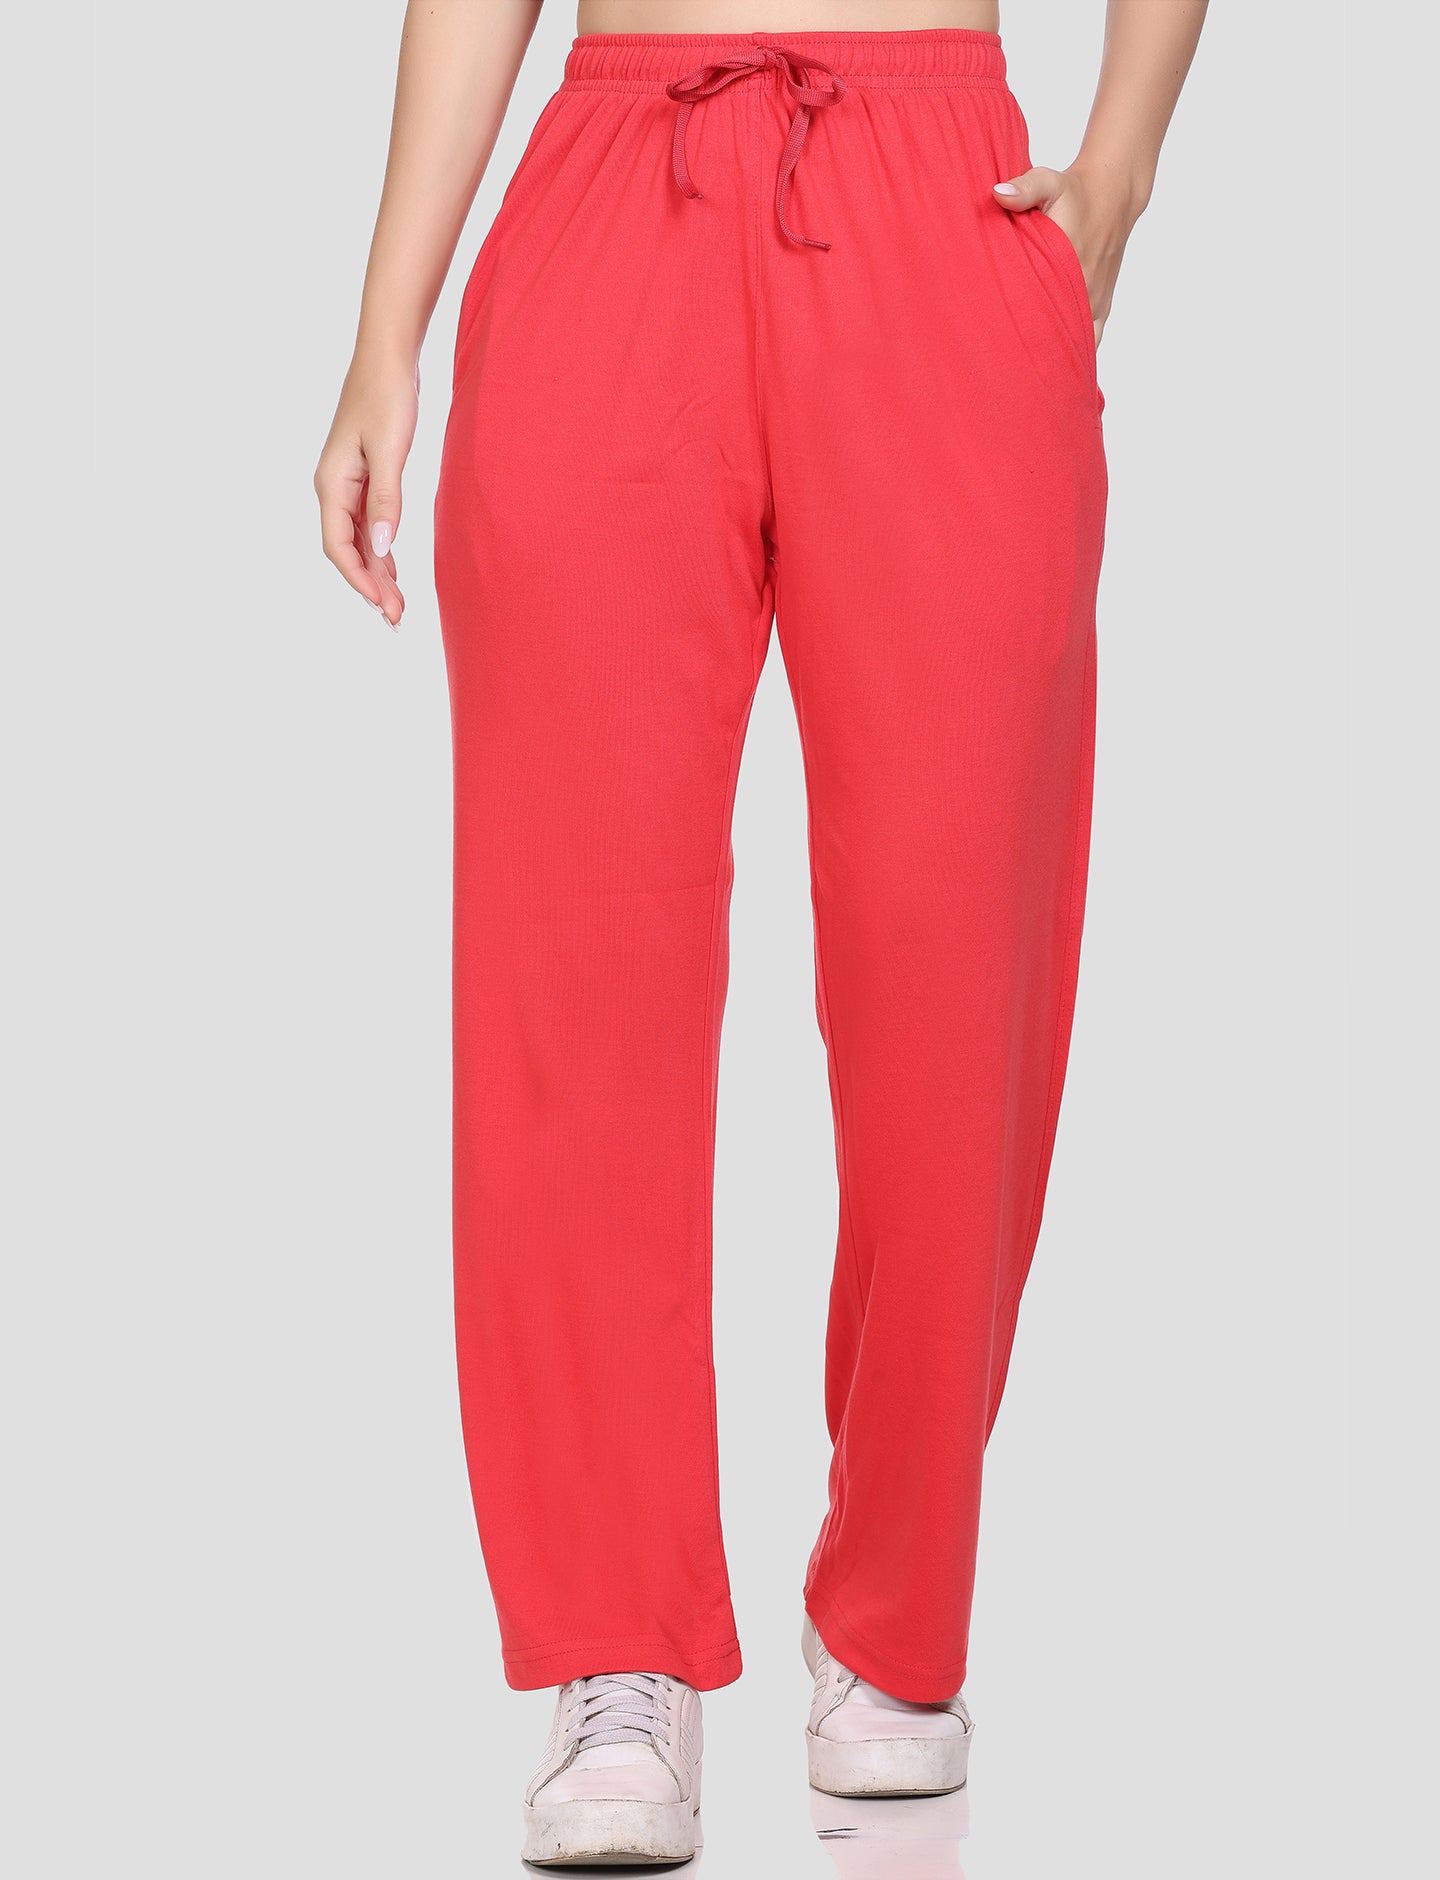 Comfortable High Waist Cotton Flared Pants For Women in Crimson Red online at best prices